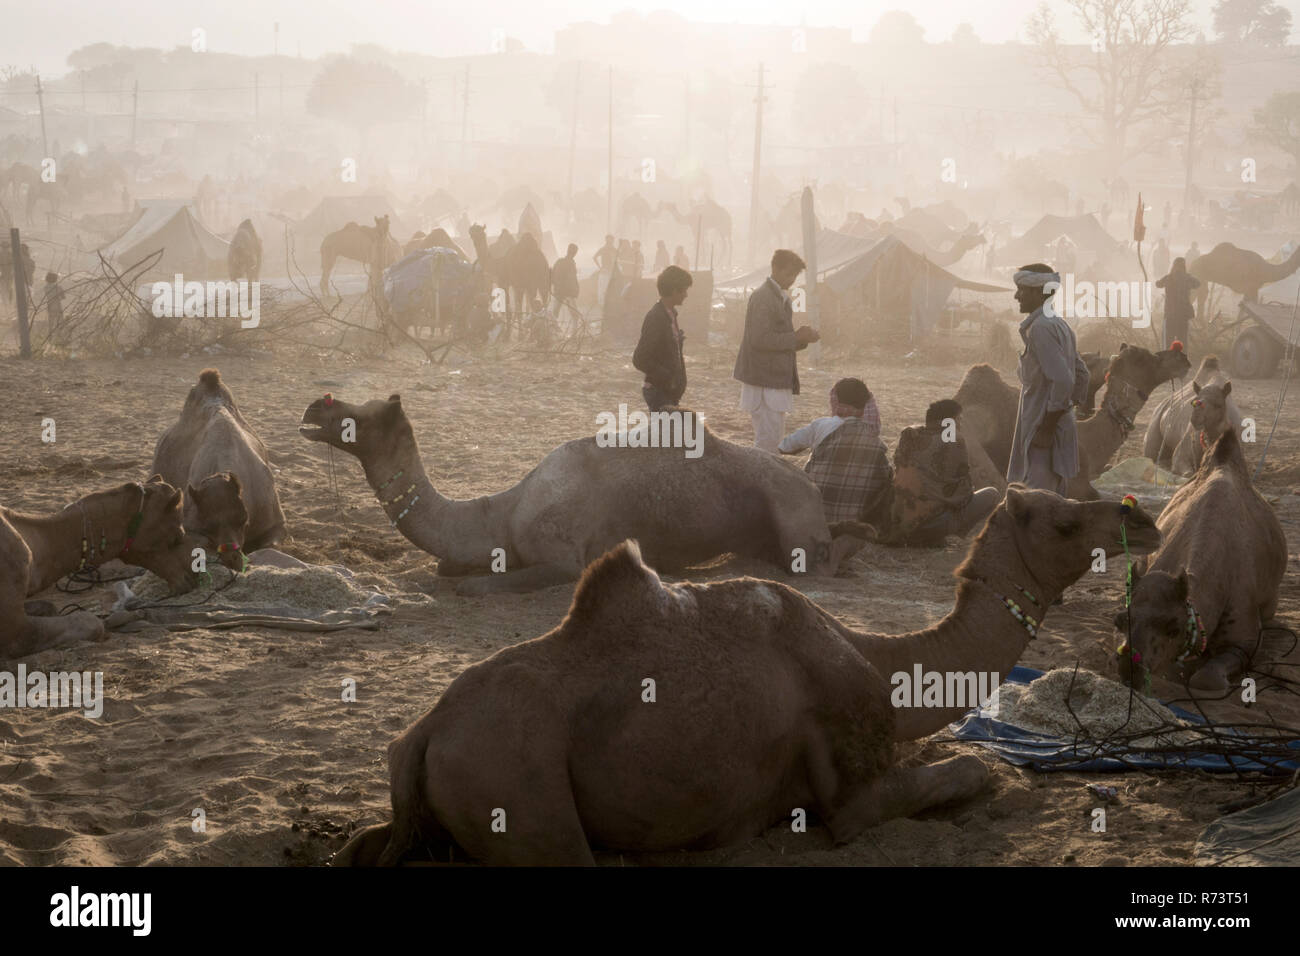 Sunrise view of camels and herders at Pushkar fair, Rajasthan, India Stock Photo